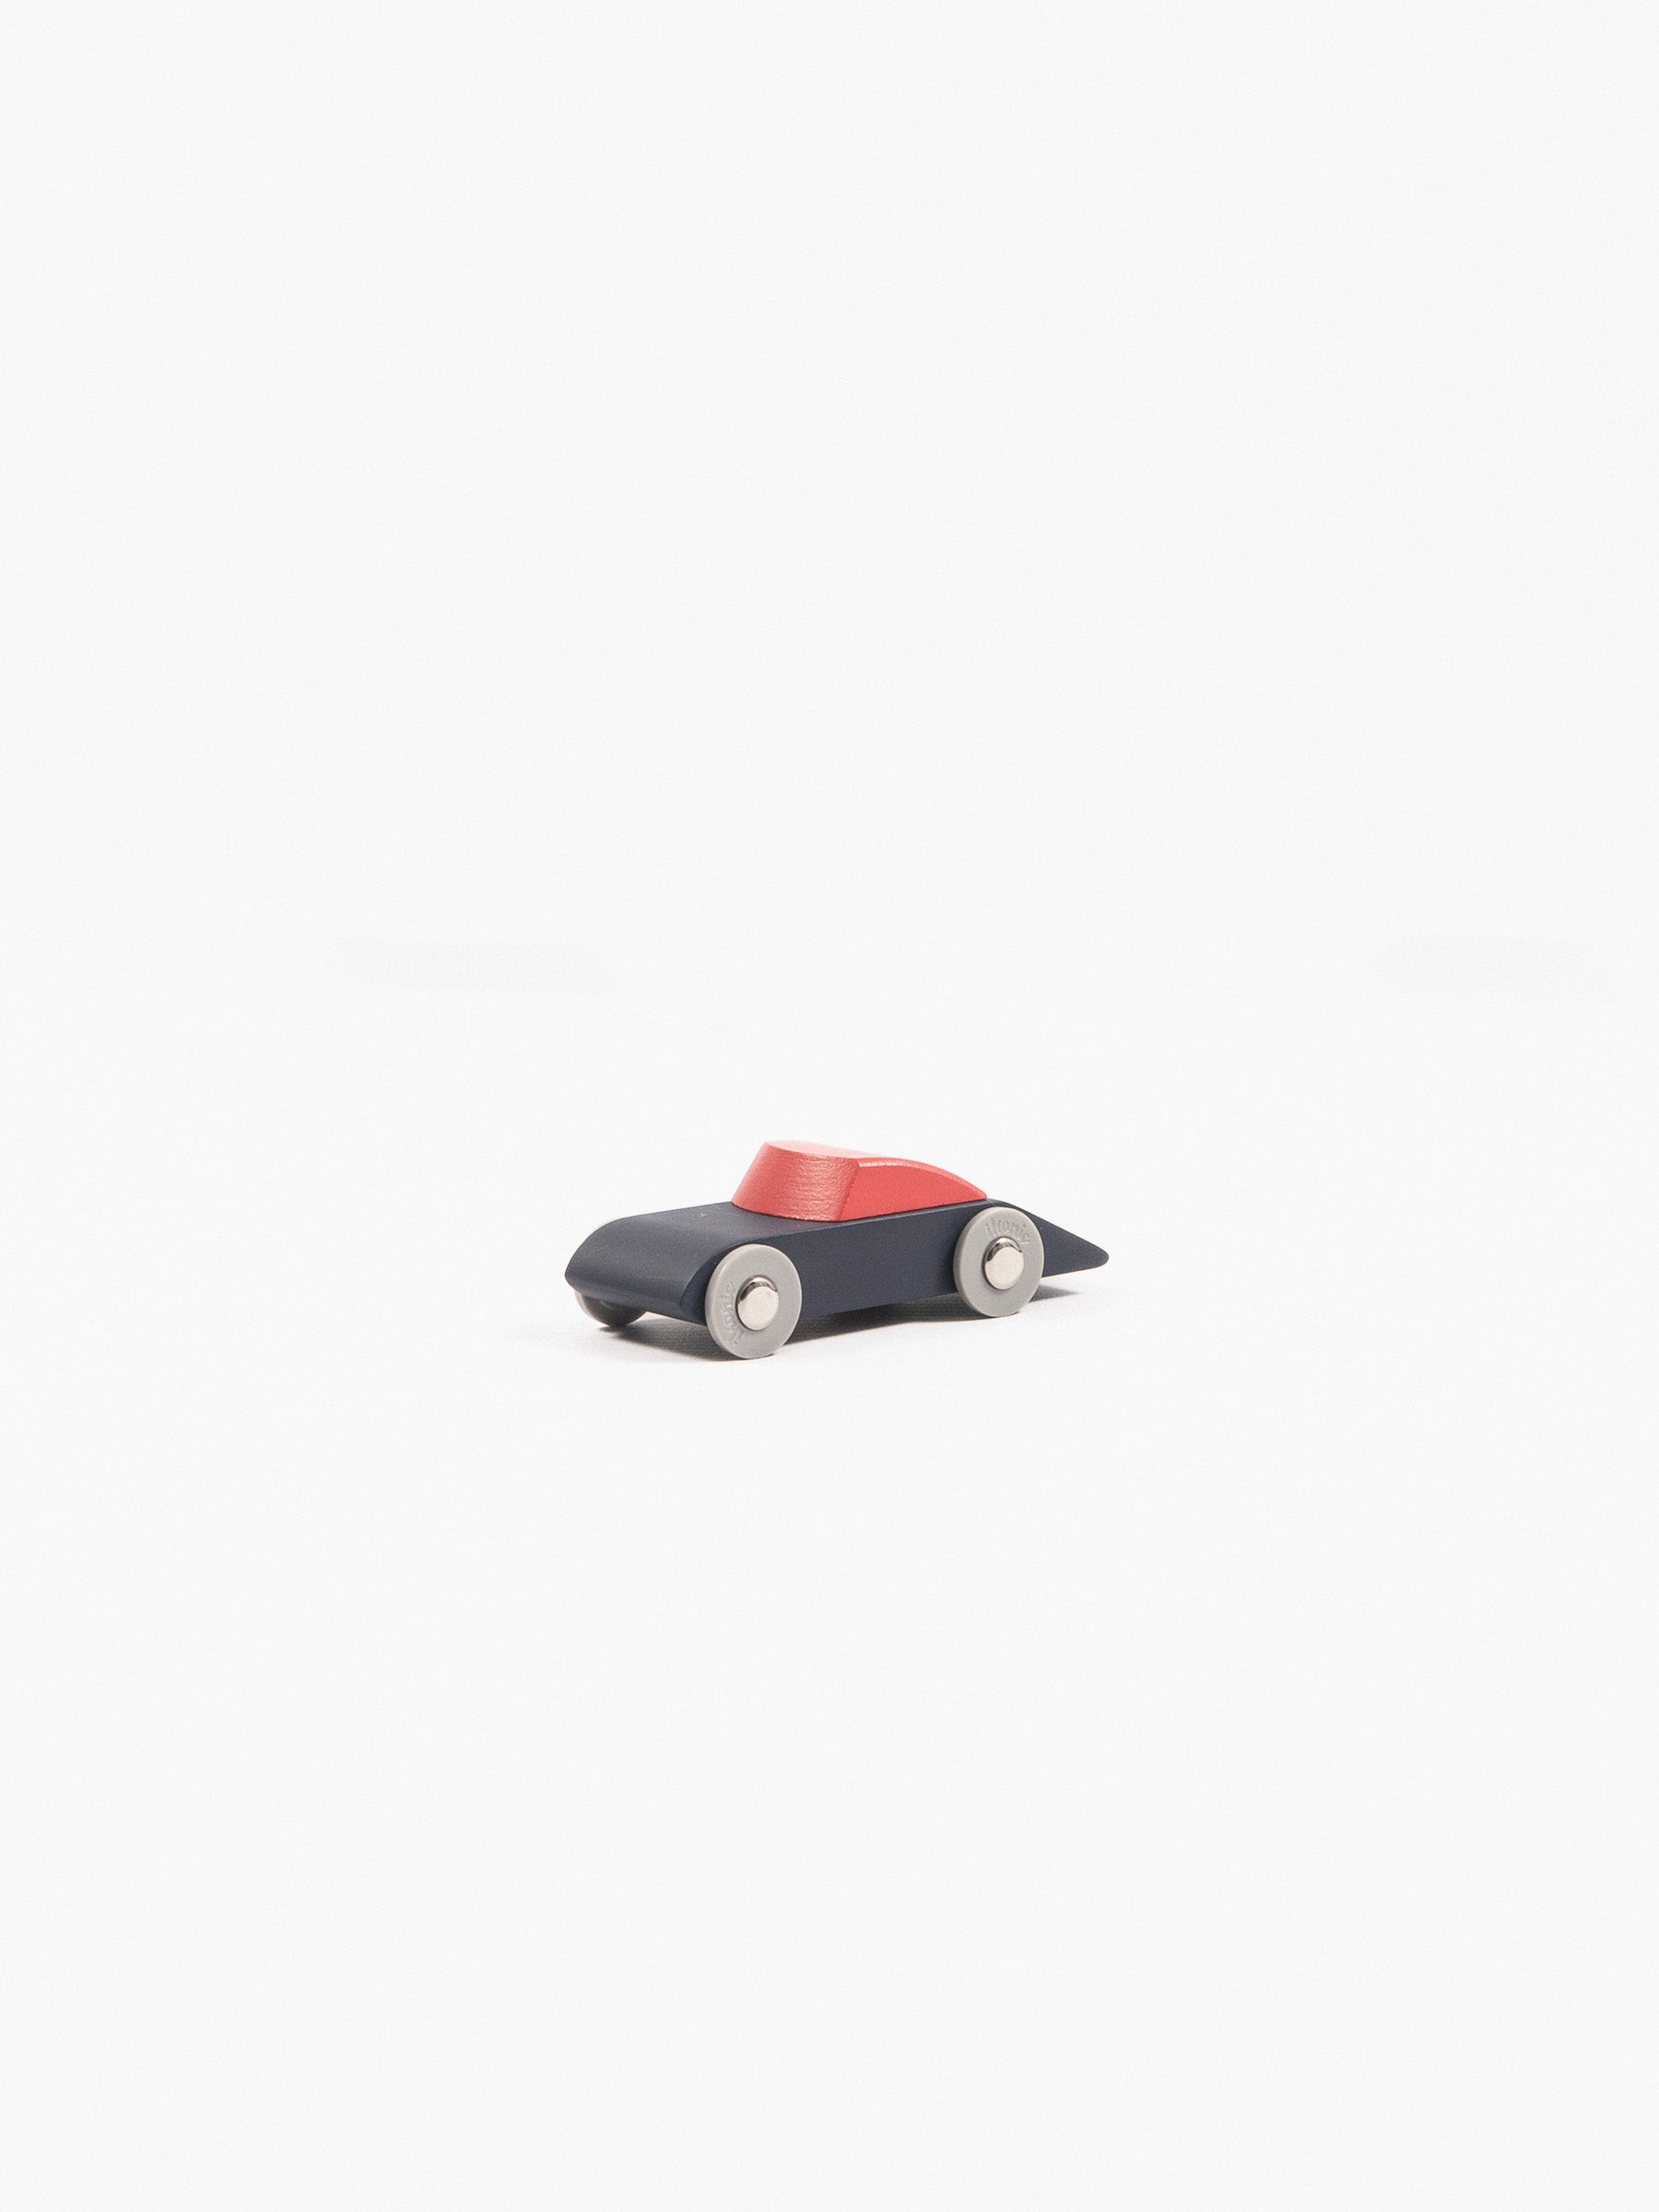 Floris Hovers Duotone Car 9 Navy/Red